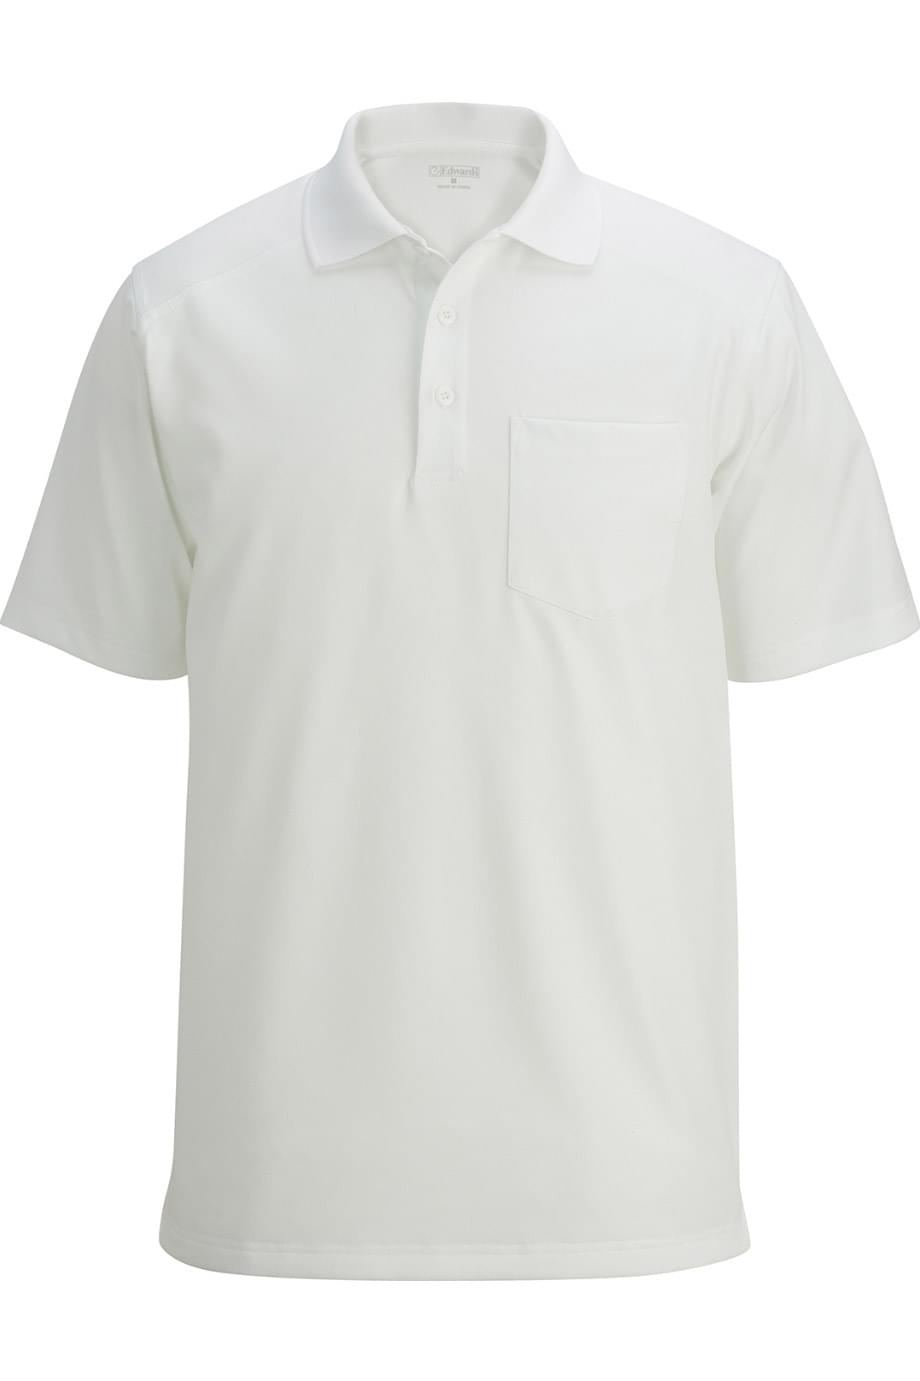 ULTIMATE SNAG-PROOF POLO WITH POCKET